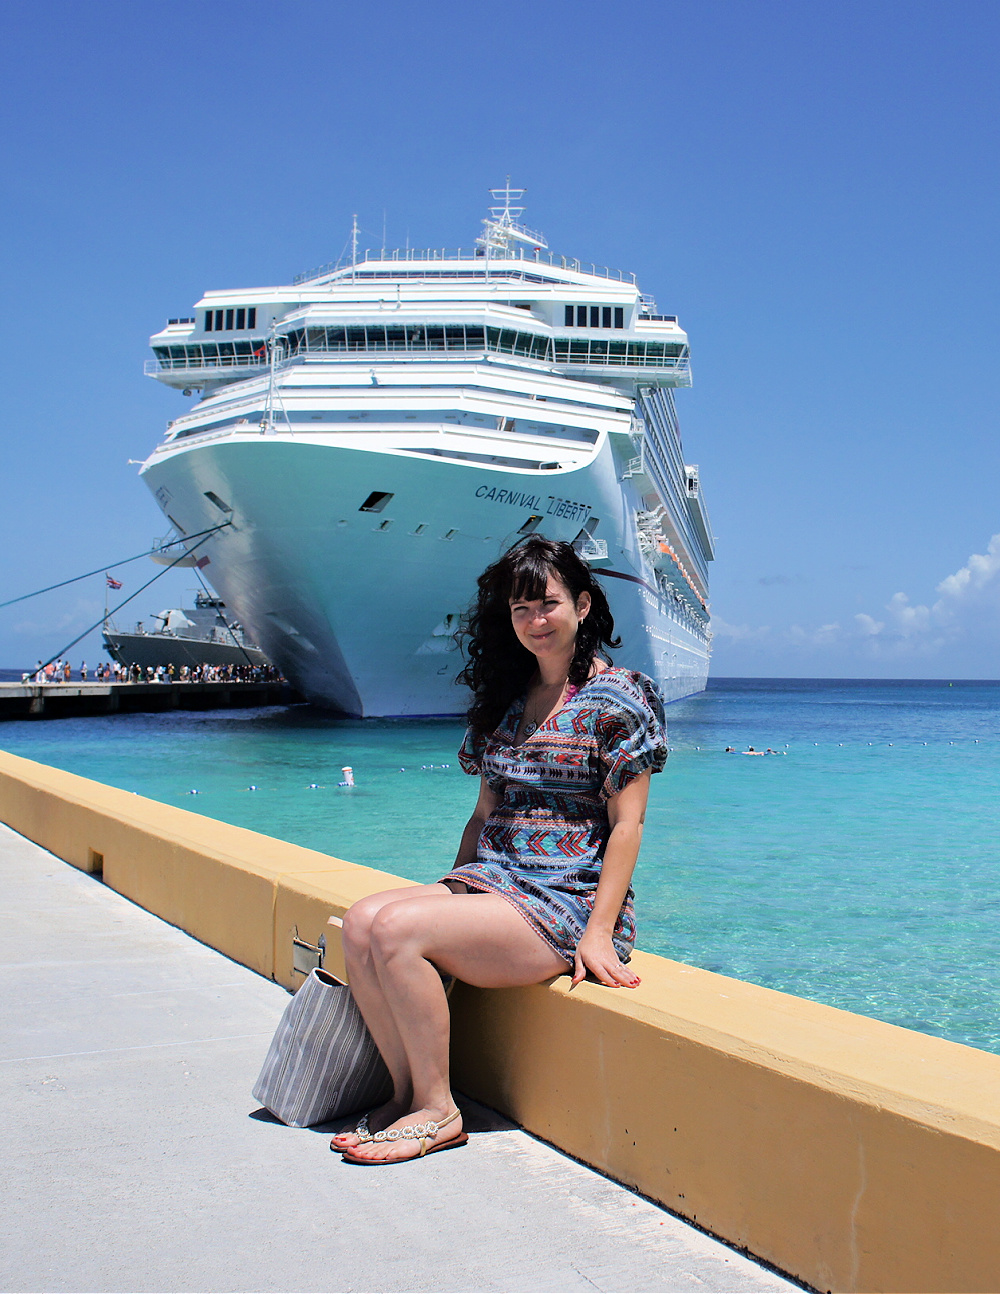 12 Things to Know Before Your First Cruise